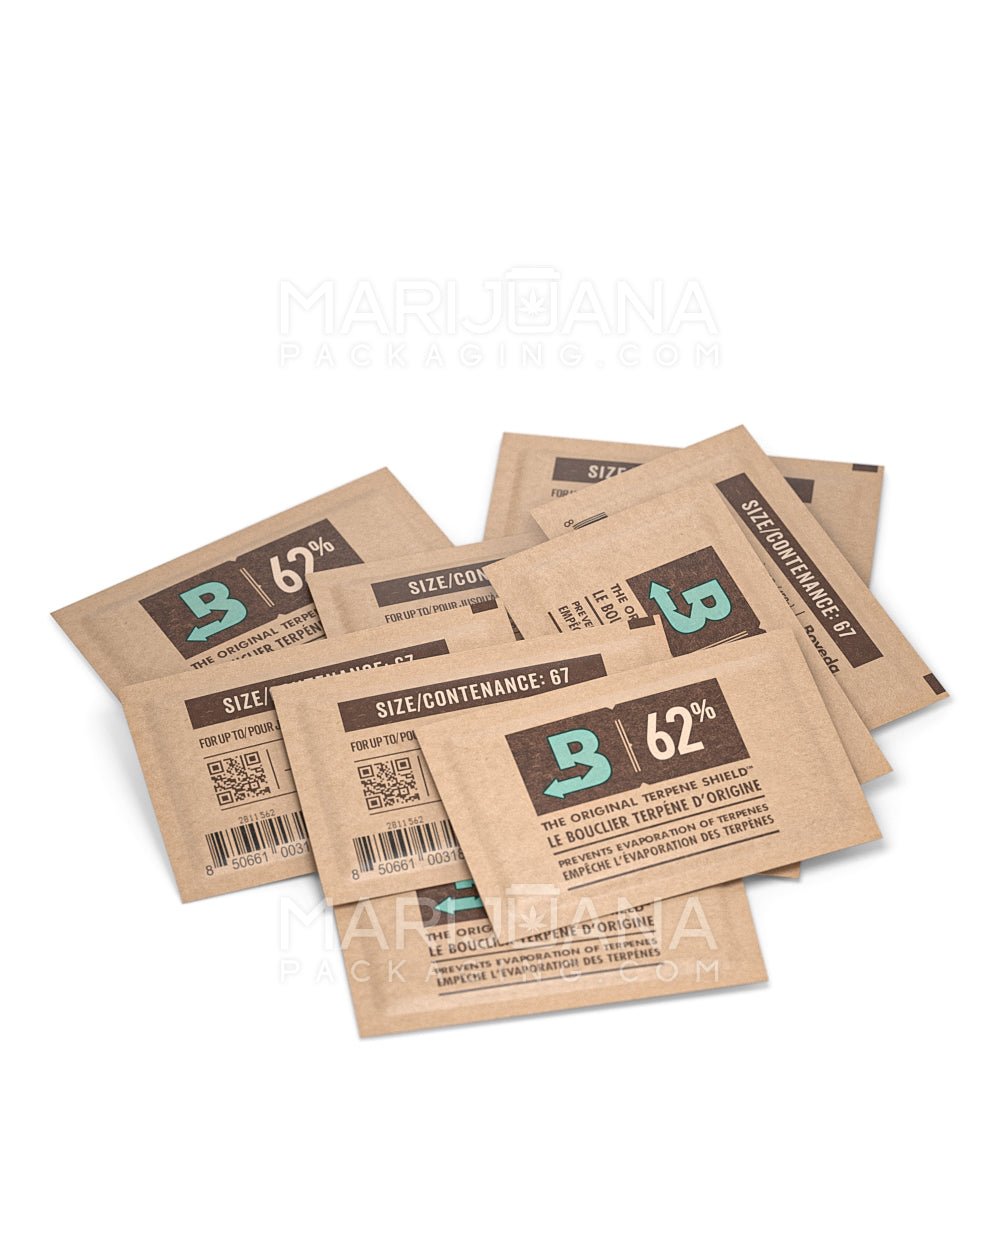 BOVEDA | Humidity Control Packs | 67 Grams - 62% - 100 Count - 7